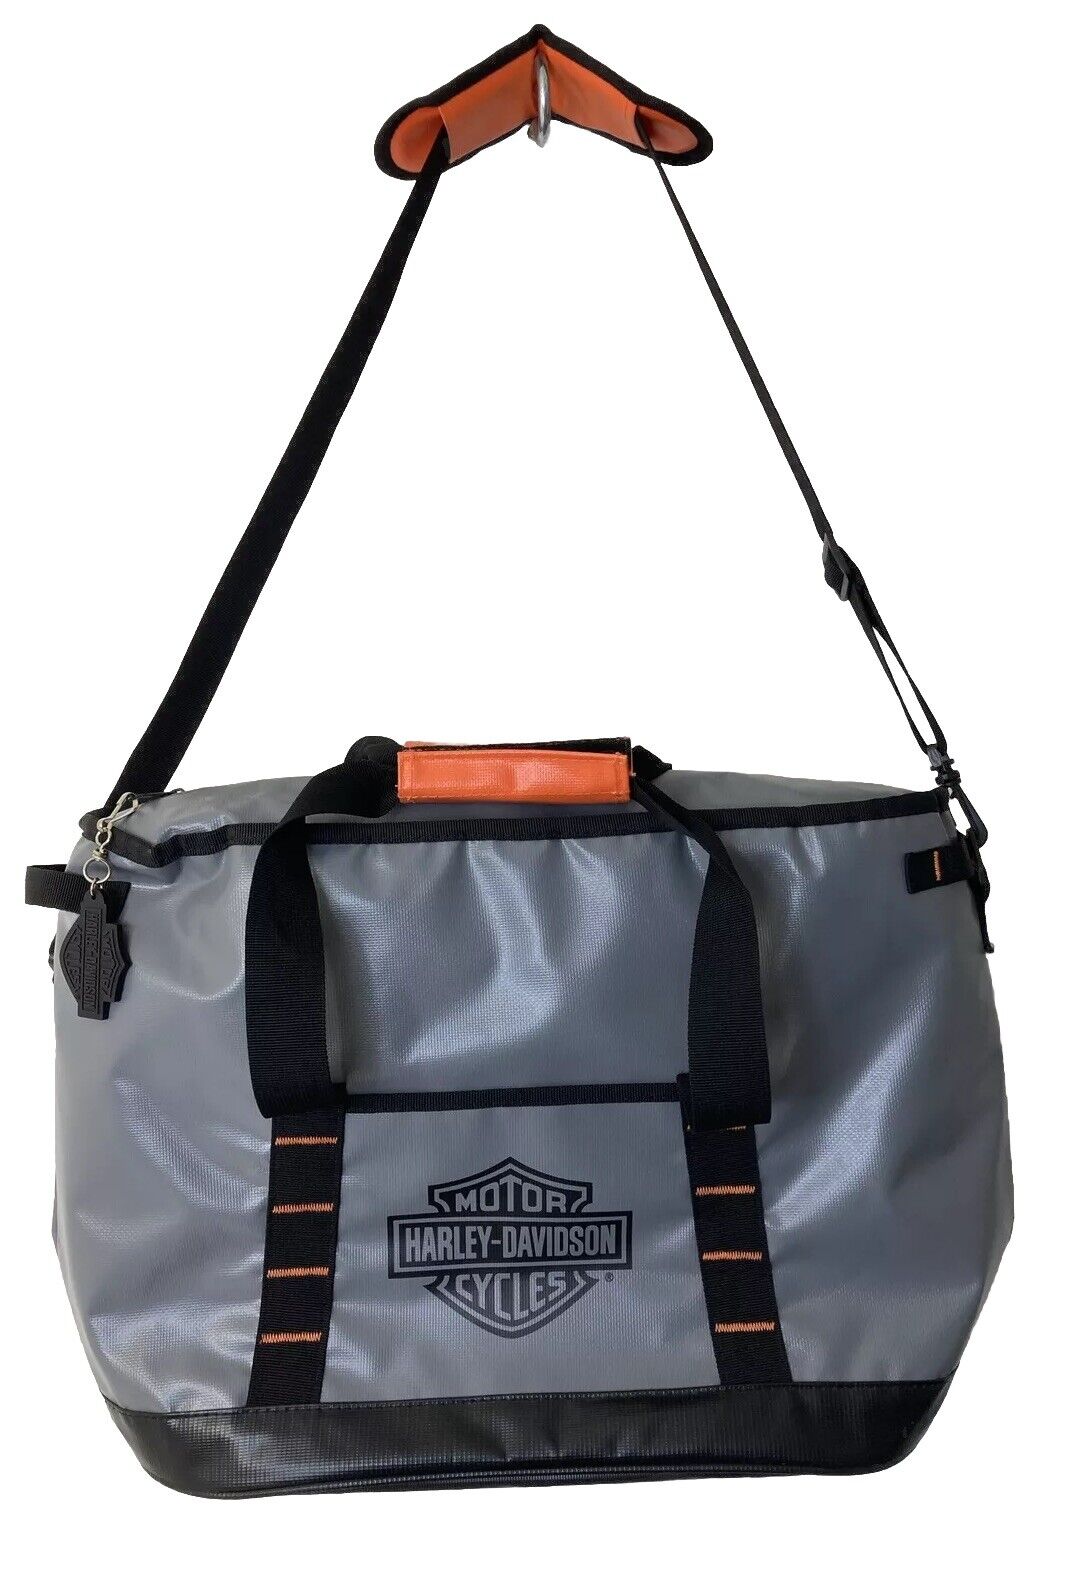 Harley Davidson Motorcycles Insulated Gray Black Cooler Bag Tote W/Strap 20”x14”